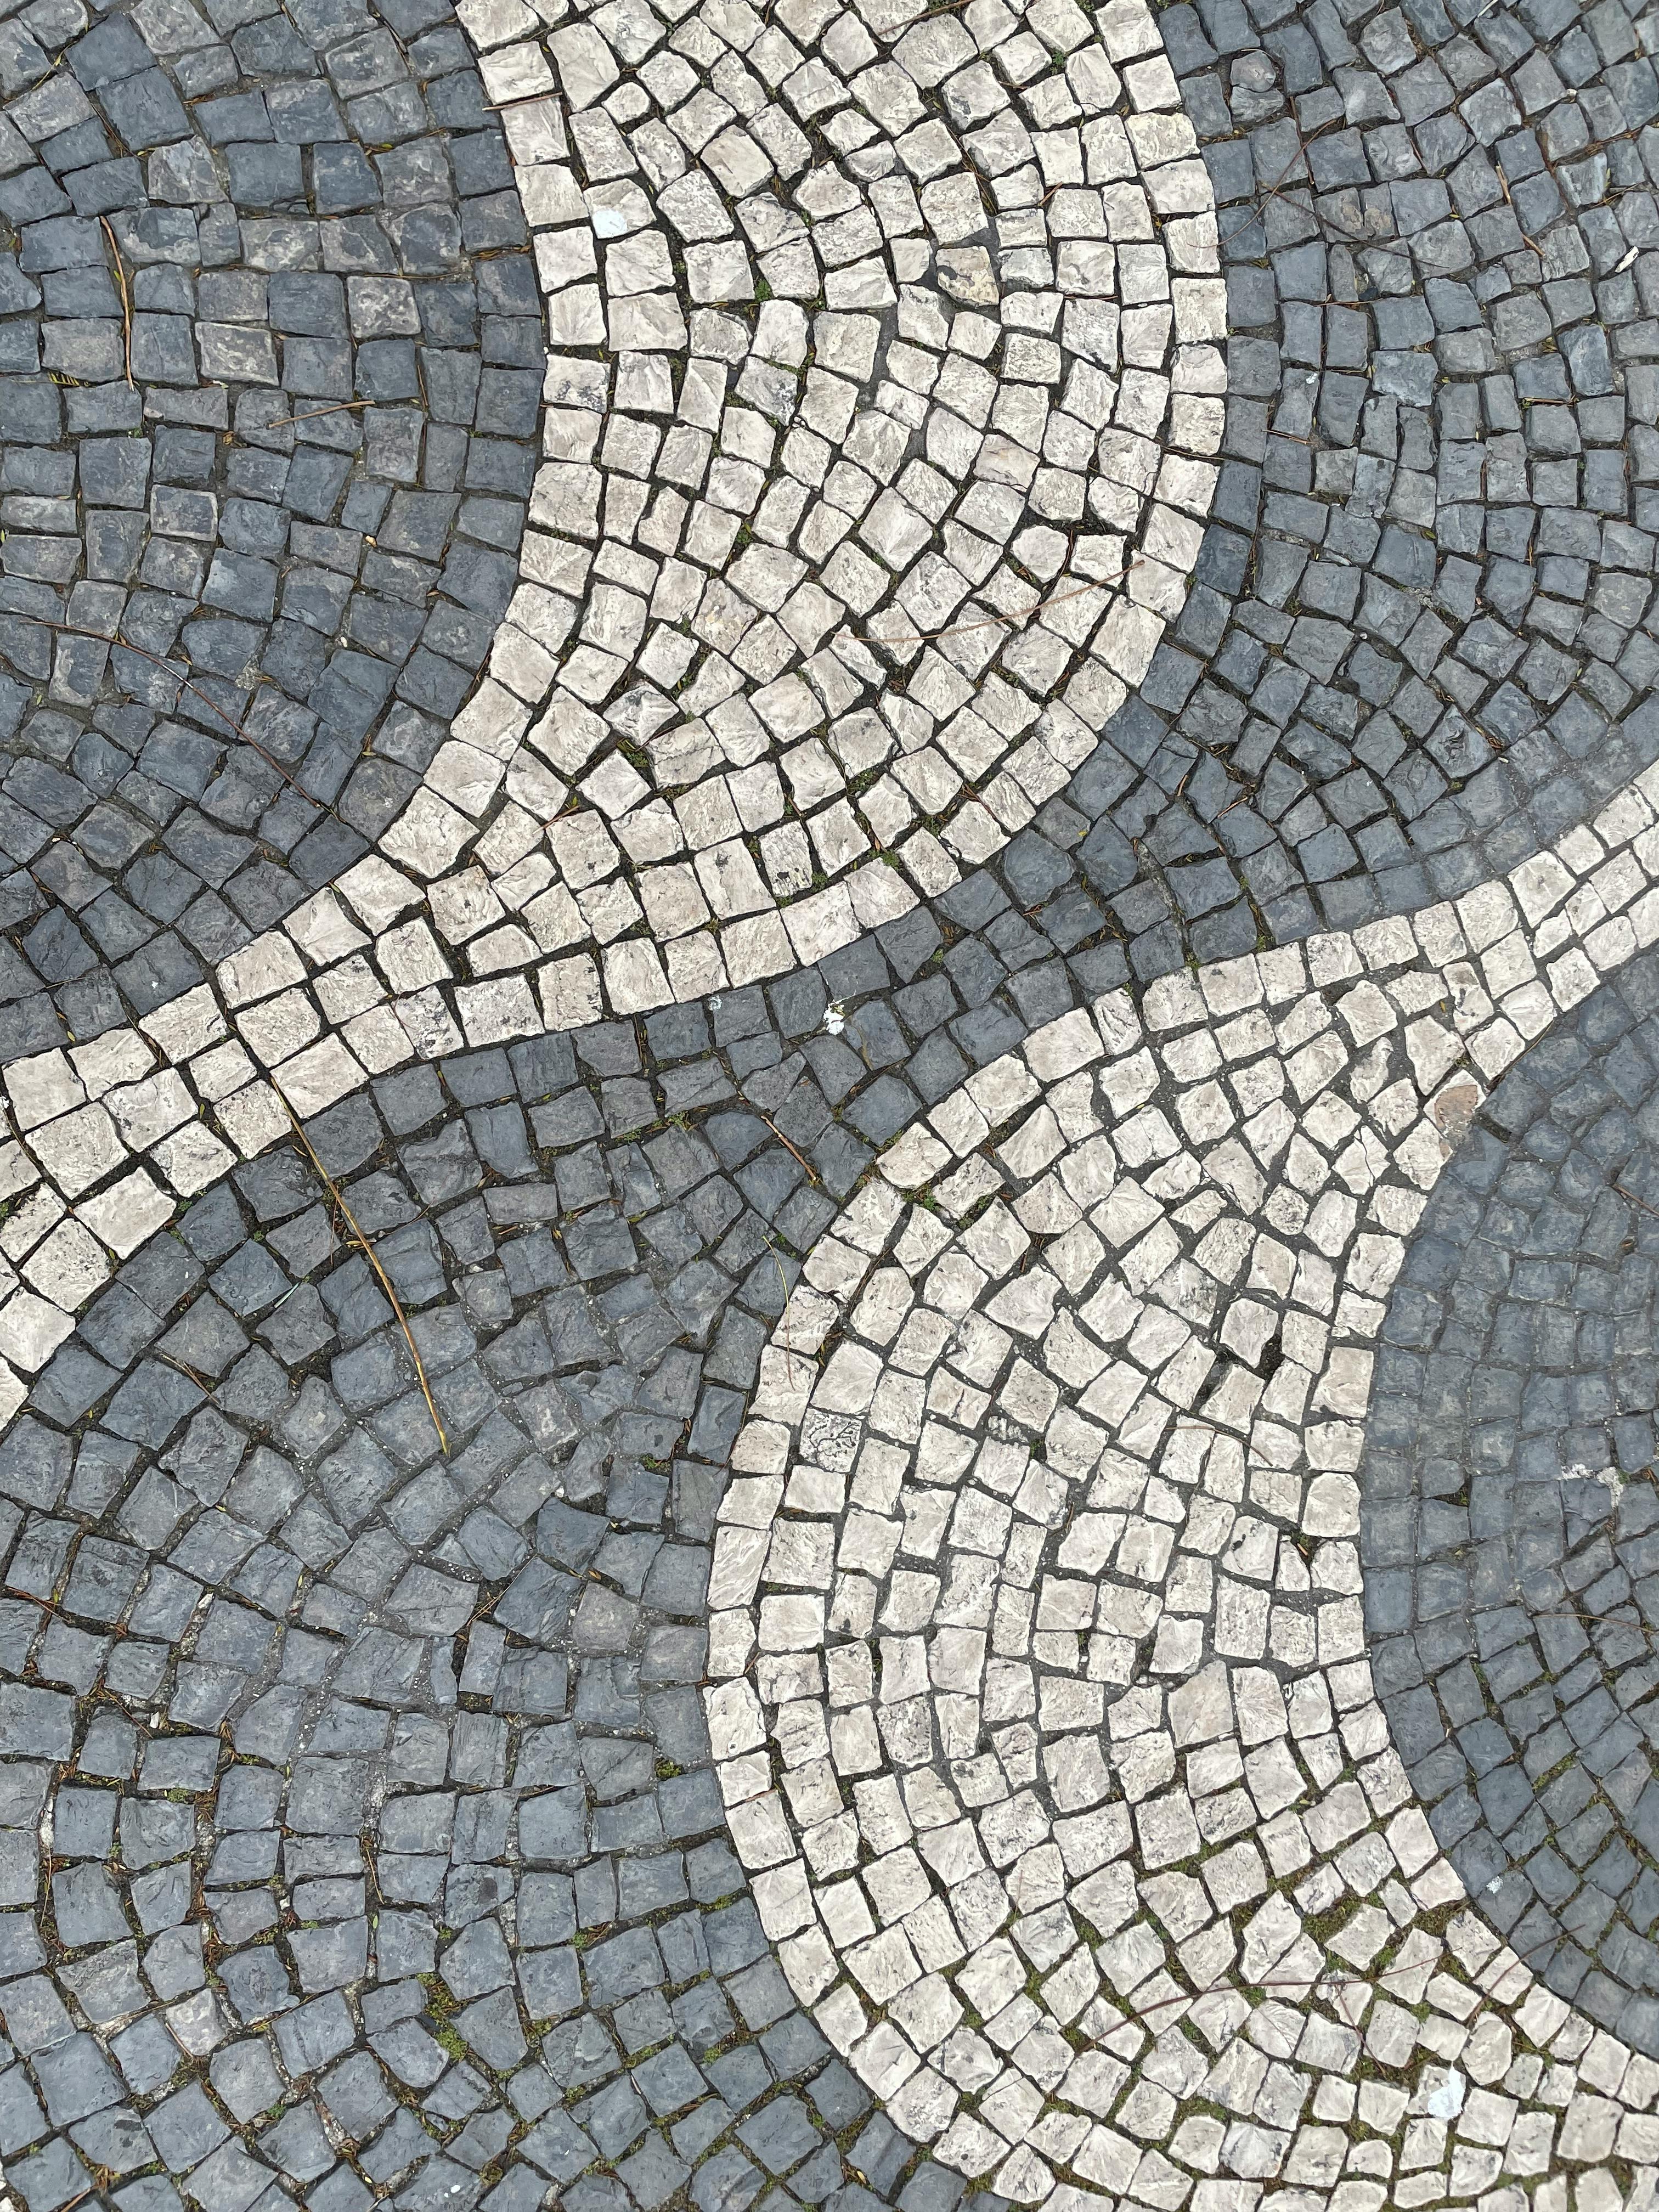 mosaic tiles on the ground